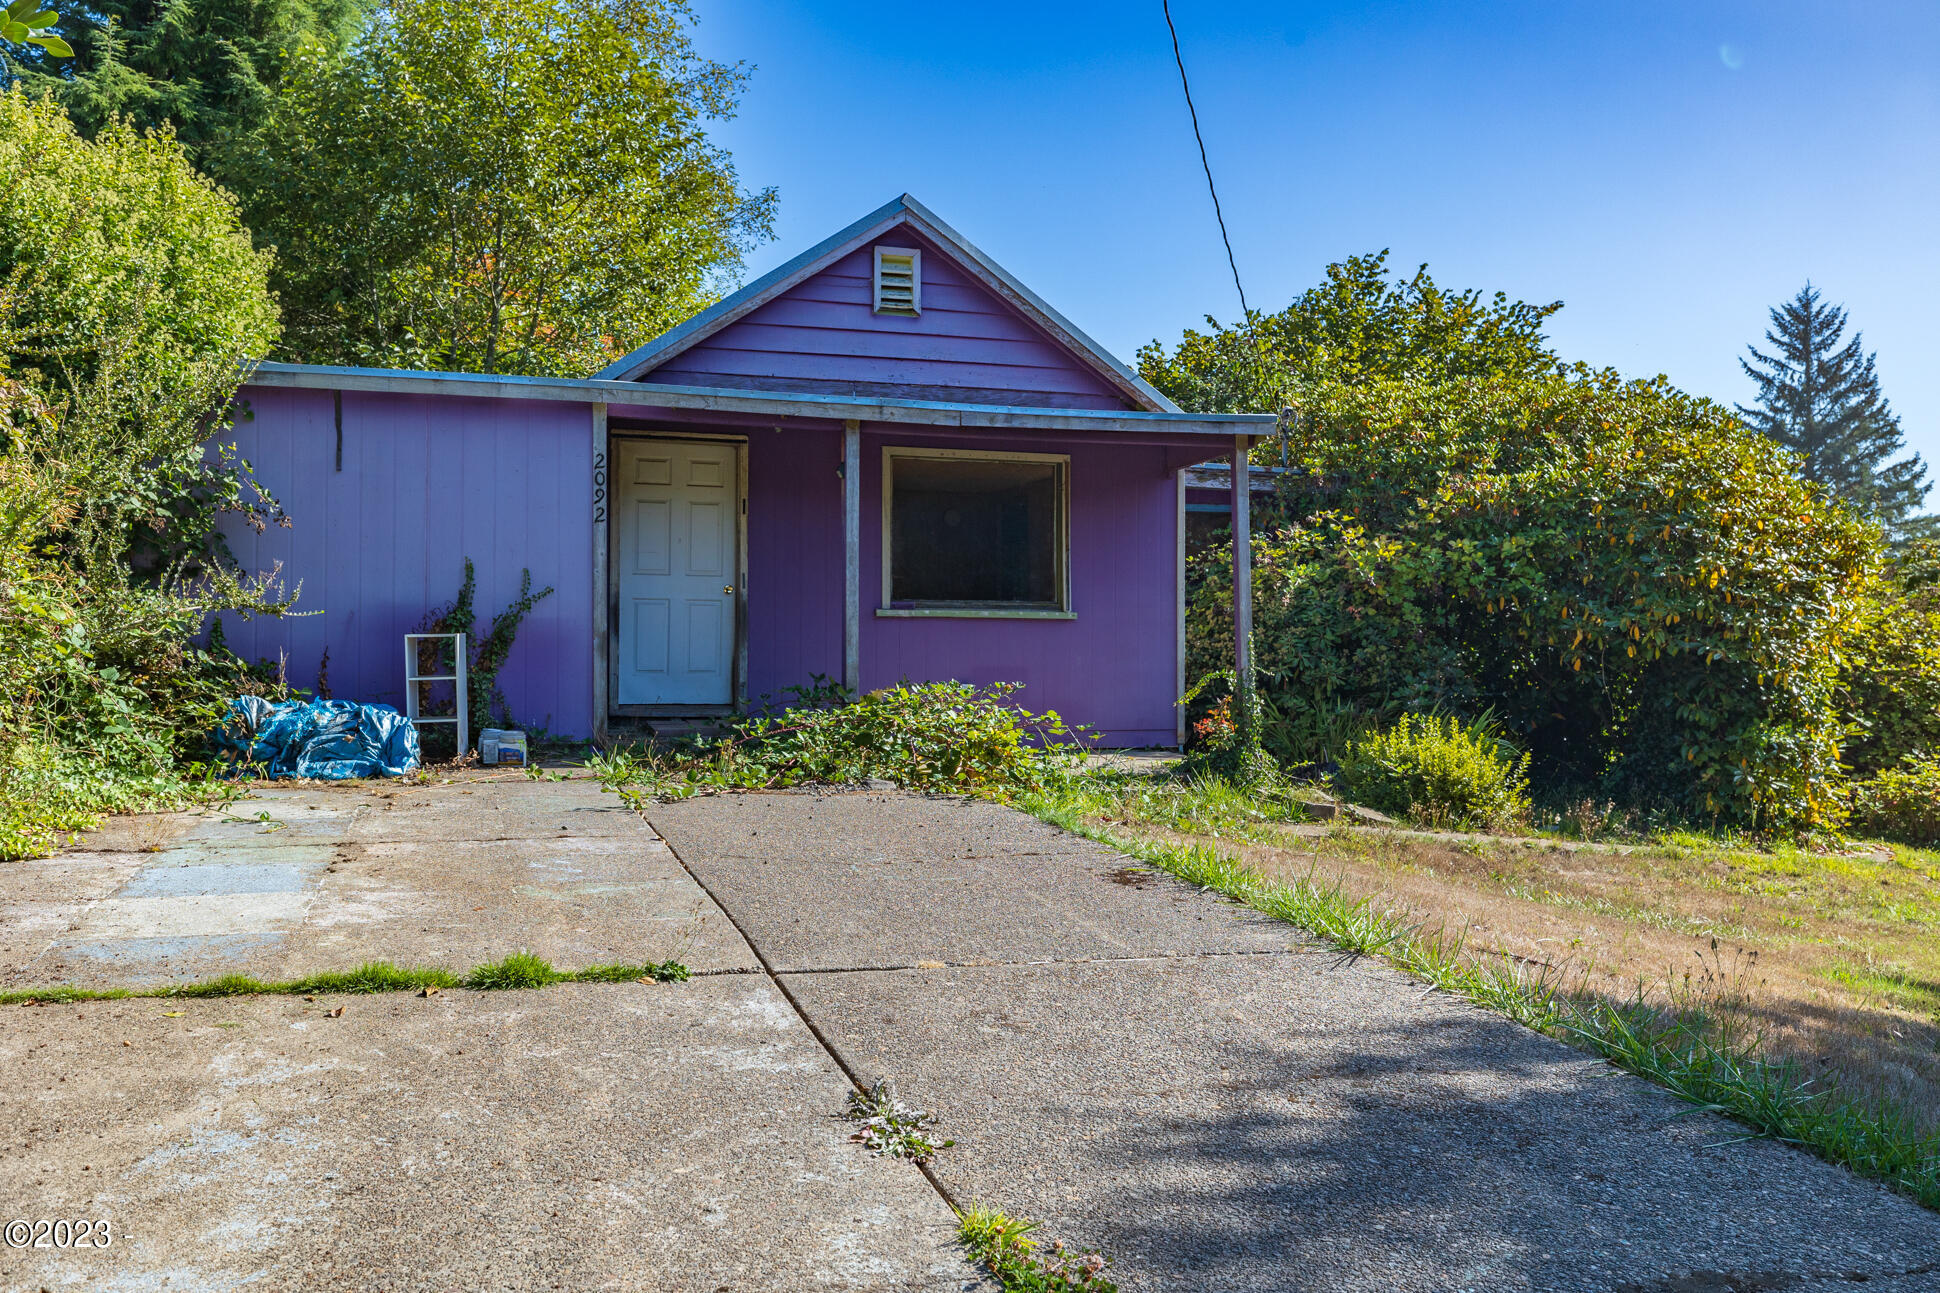 2092 E Alsea Highway Depoe Bay, Gleneden Beach, Lincoln City, Newport, Otis, Rose Lodge, Seal Rock, Waldport, Yachats, To Home Listings - Amy Plechaty, Emerald Coast Realty Real Estate, homes for sale, property for sale